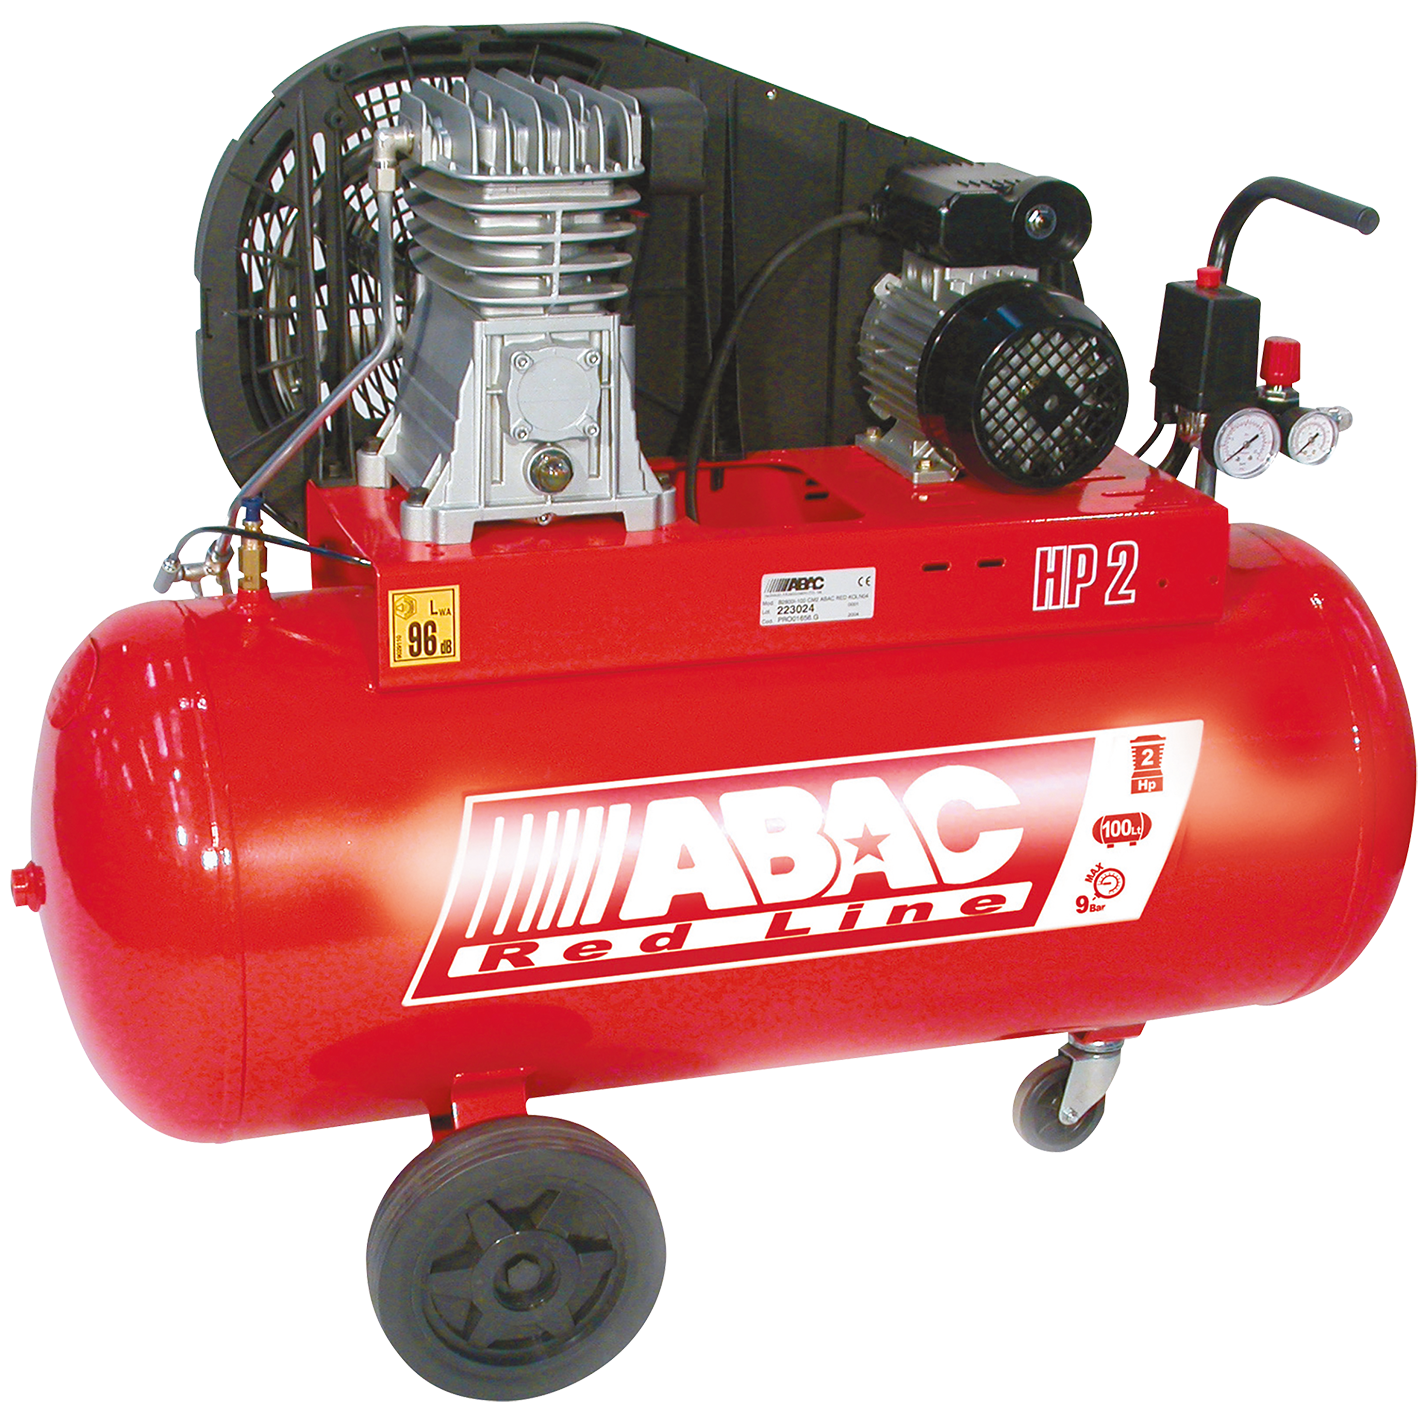 Providers of High Quality Portable Compressors